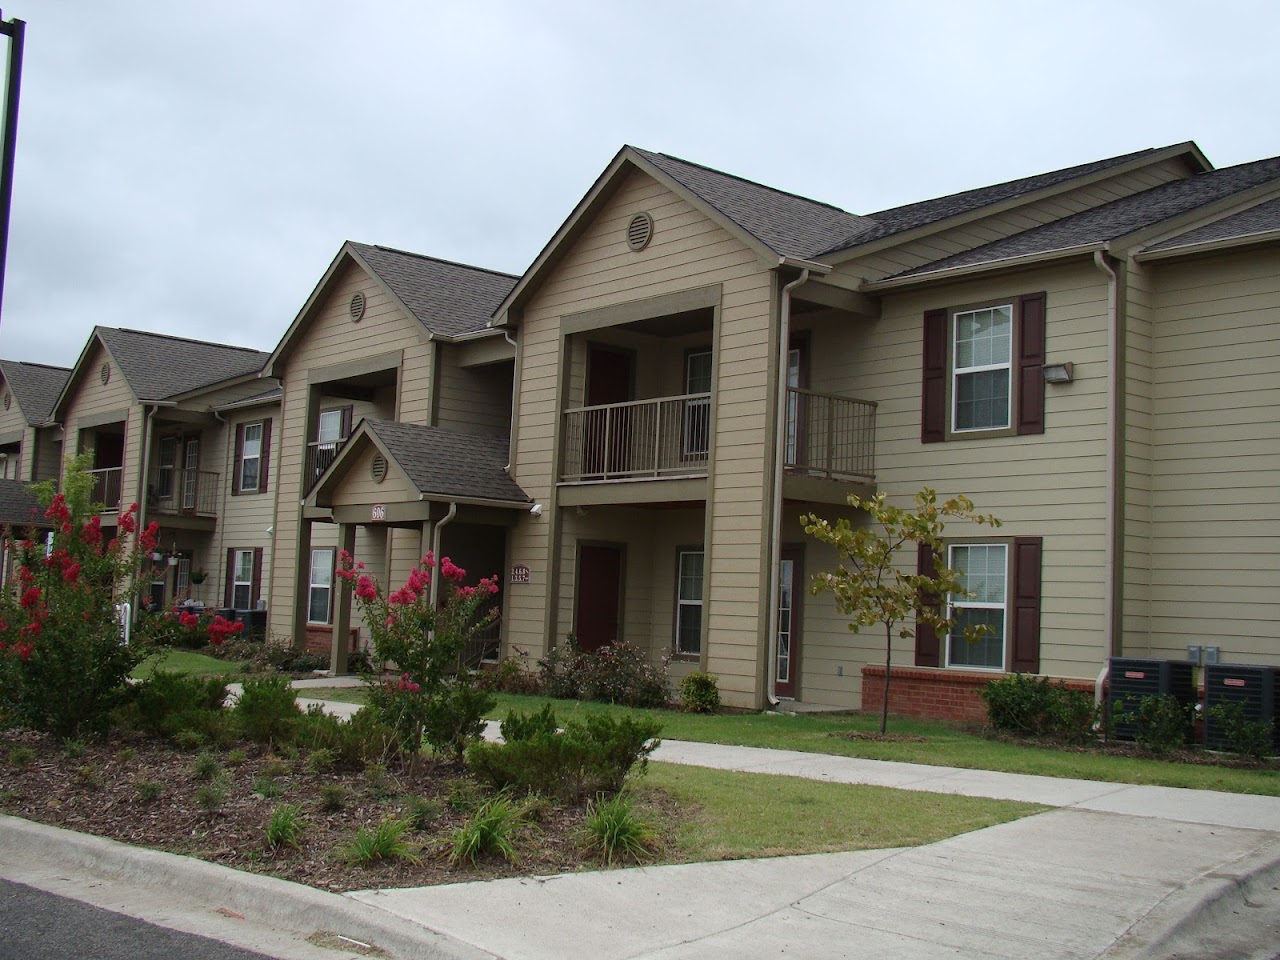 Photo of PARKWAY VILLAGE. Affordable housing located at 704 W CARL ALBERT PKWY MCALESTER, OK 74501